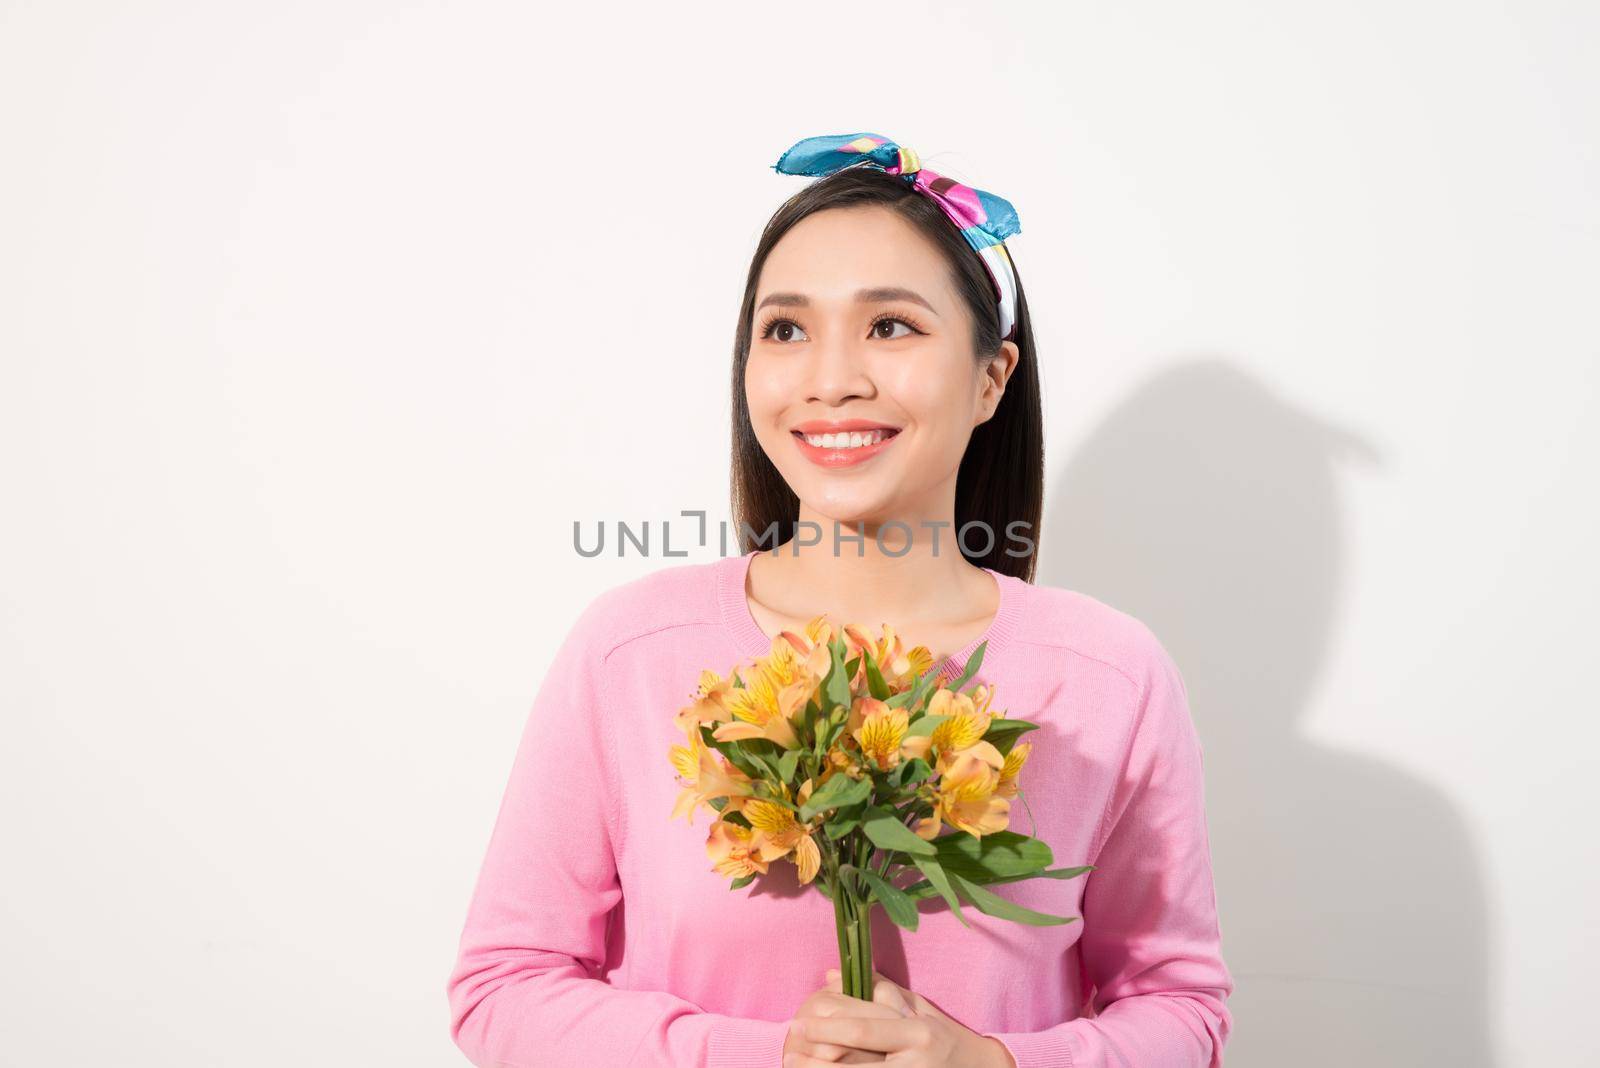 Toothy smiling happy woman holding flower . White background isolated portrait.